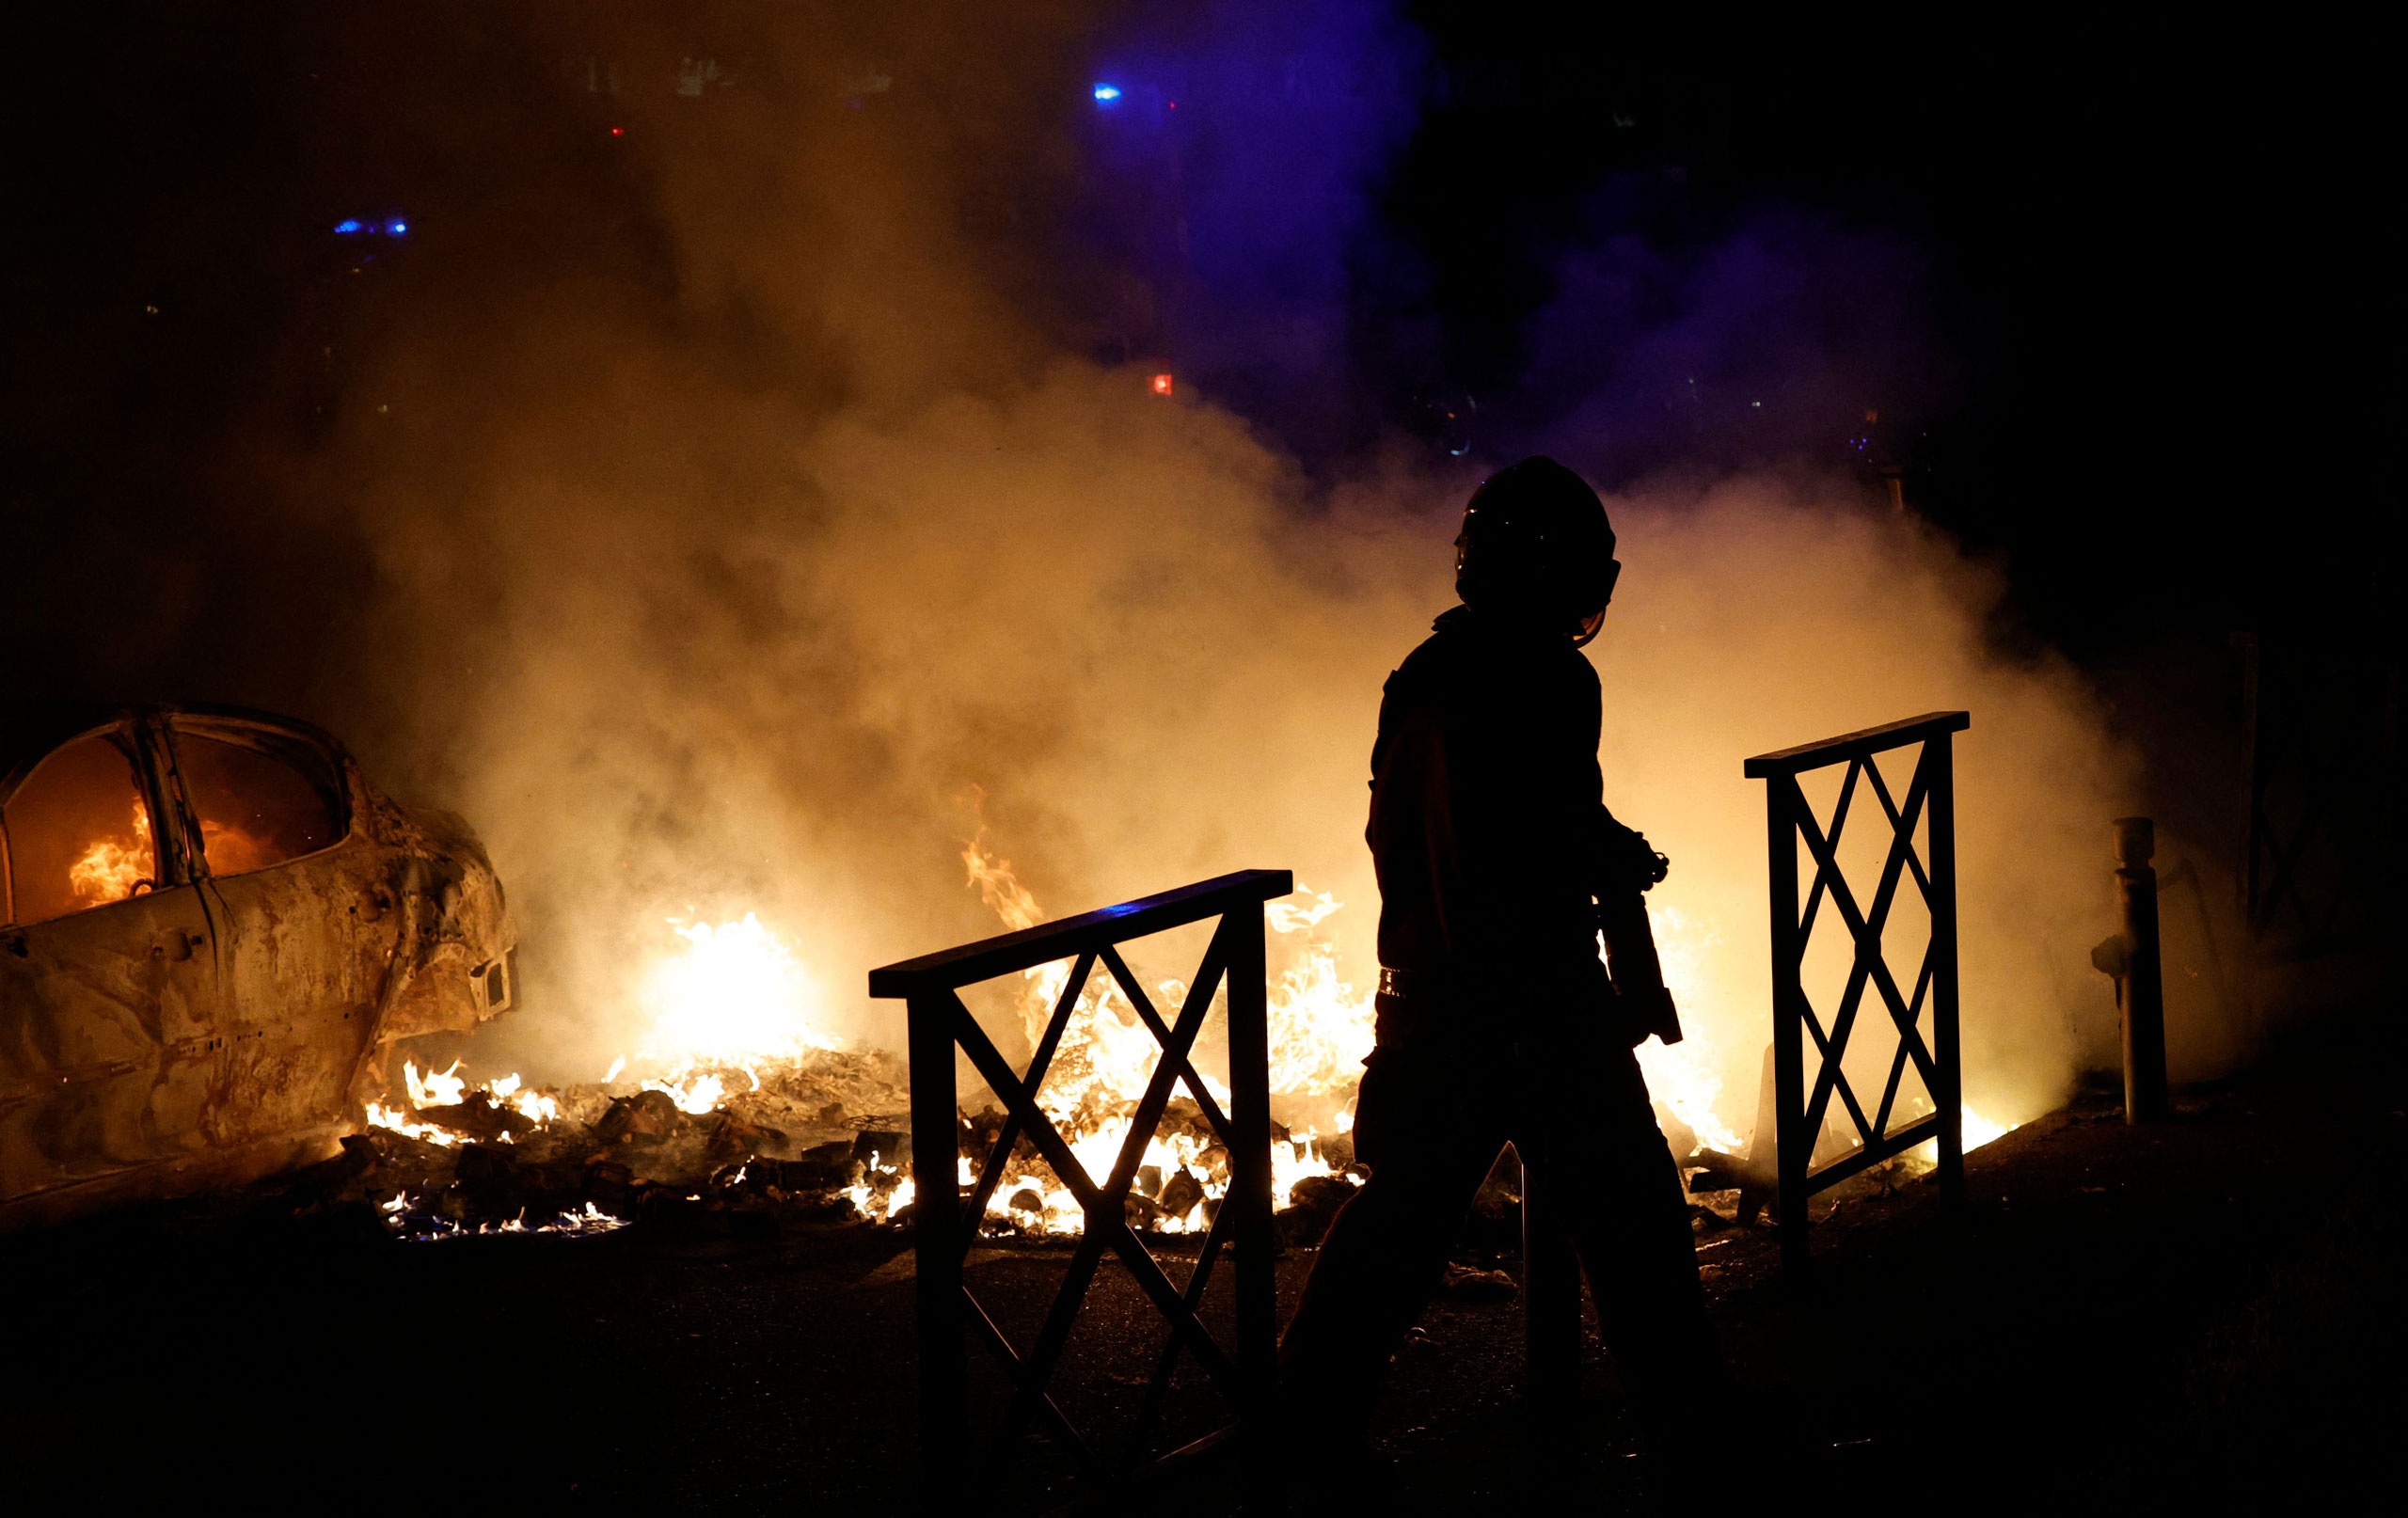 A firefighter extinguishes the flames of a car set on fire during protests in Nanterre in the early hours of June 29, 2023. (Geoffroy Van der Hasselt—AFP/Getty Images)